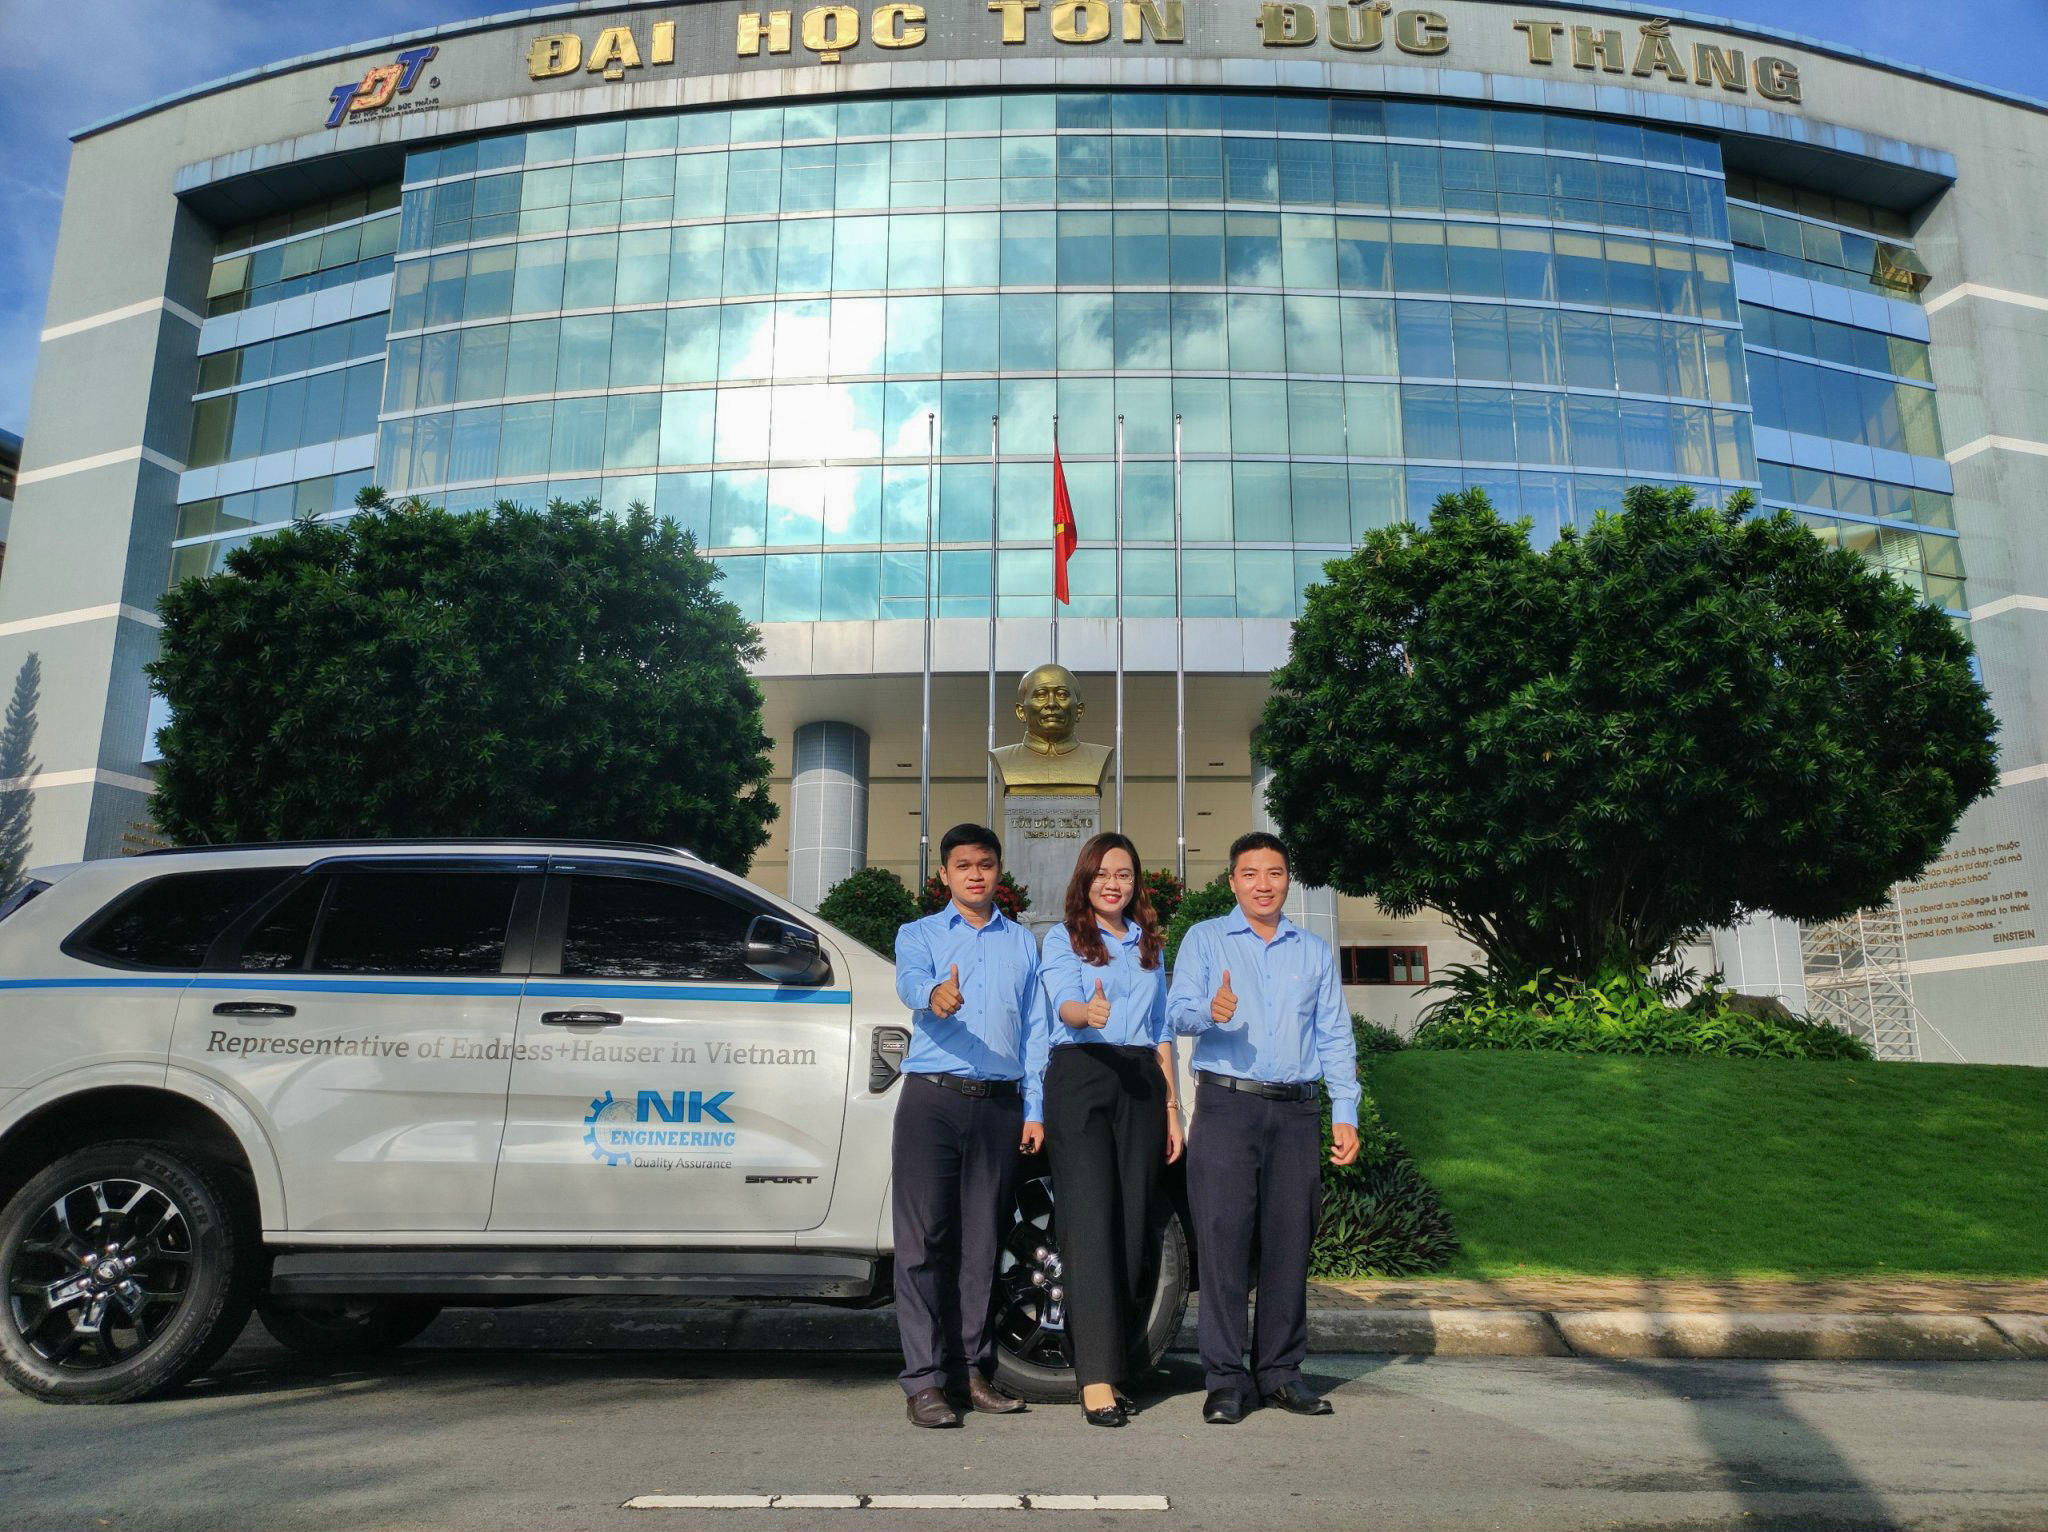 NK Engineering conducted a classroom session at Ton Duc Thang University